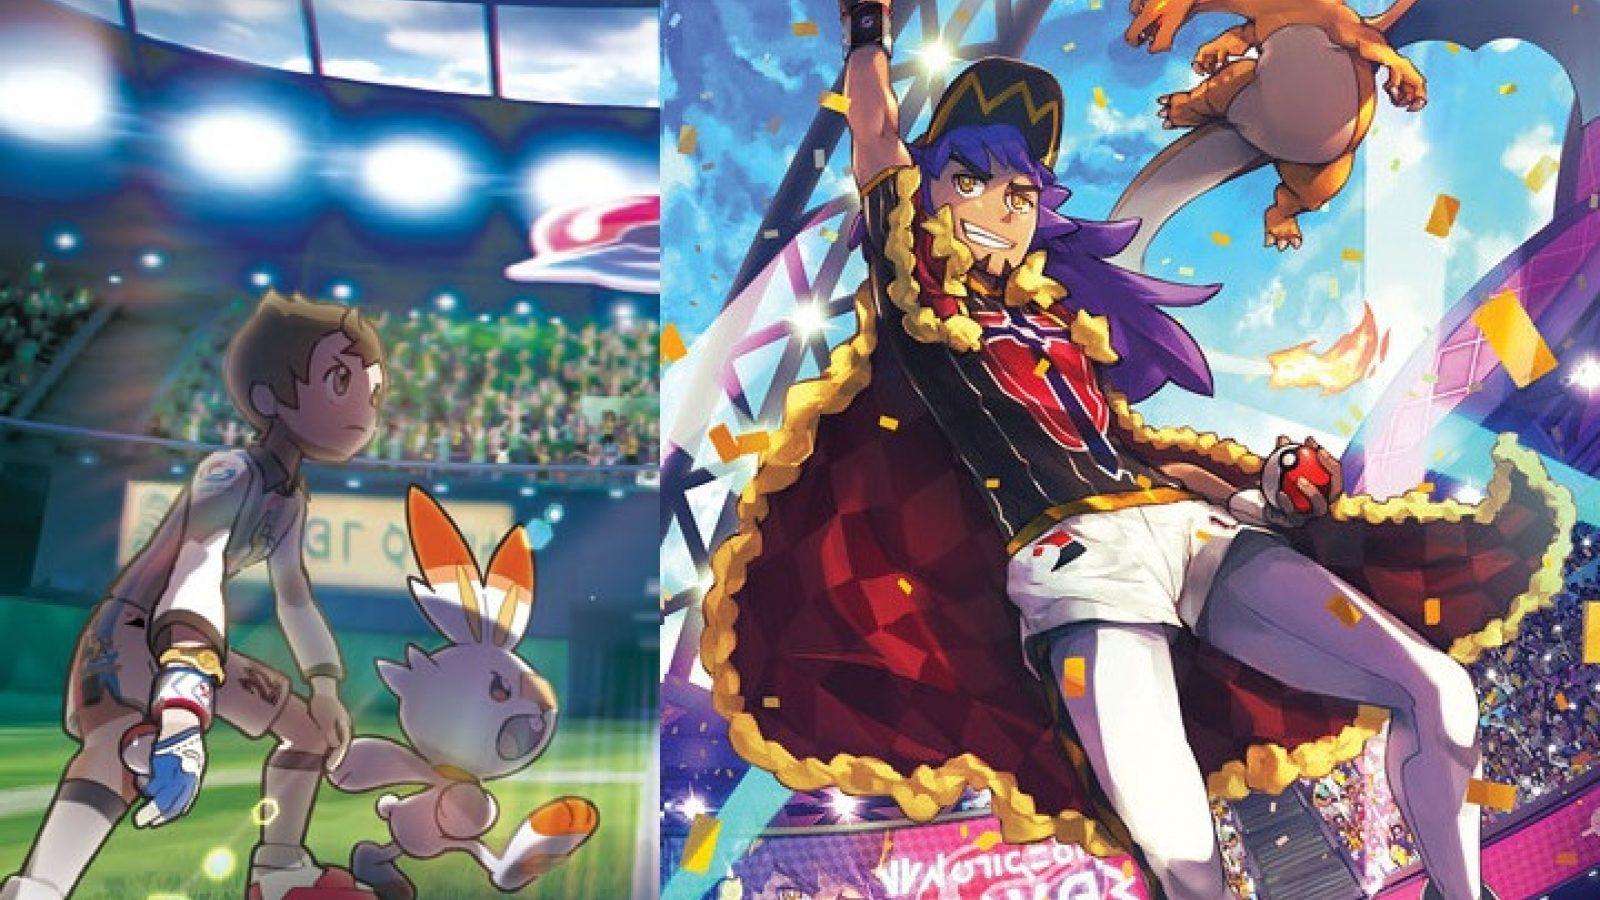 Pokémon Sword and Shield has version exclusive gym leaders